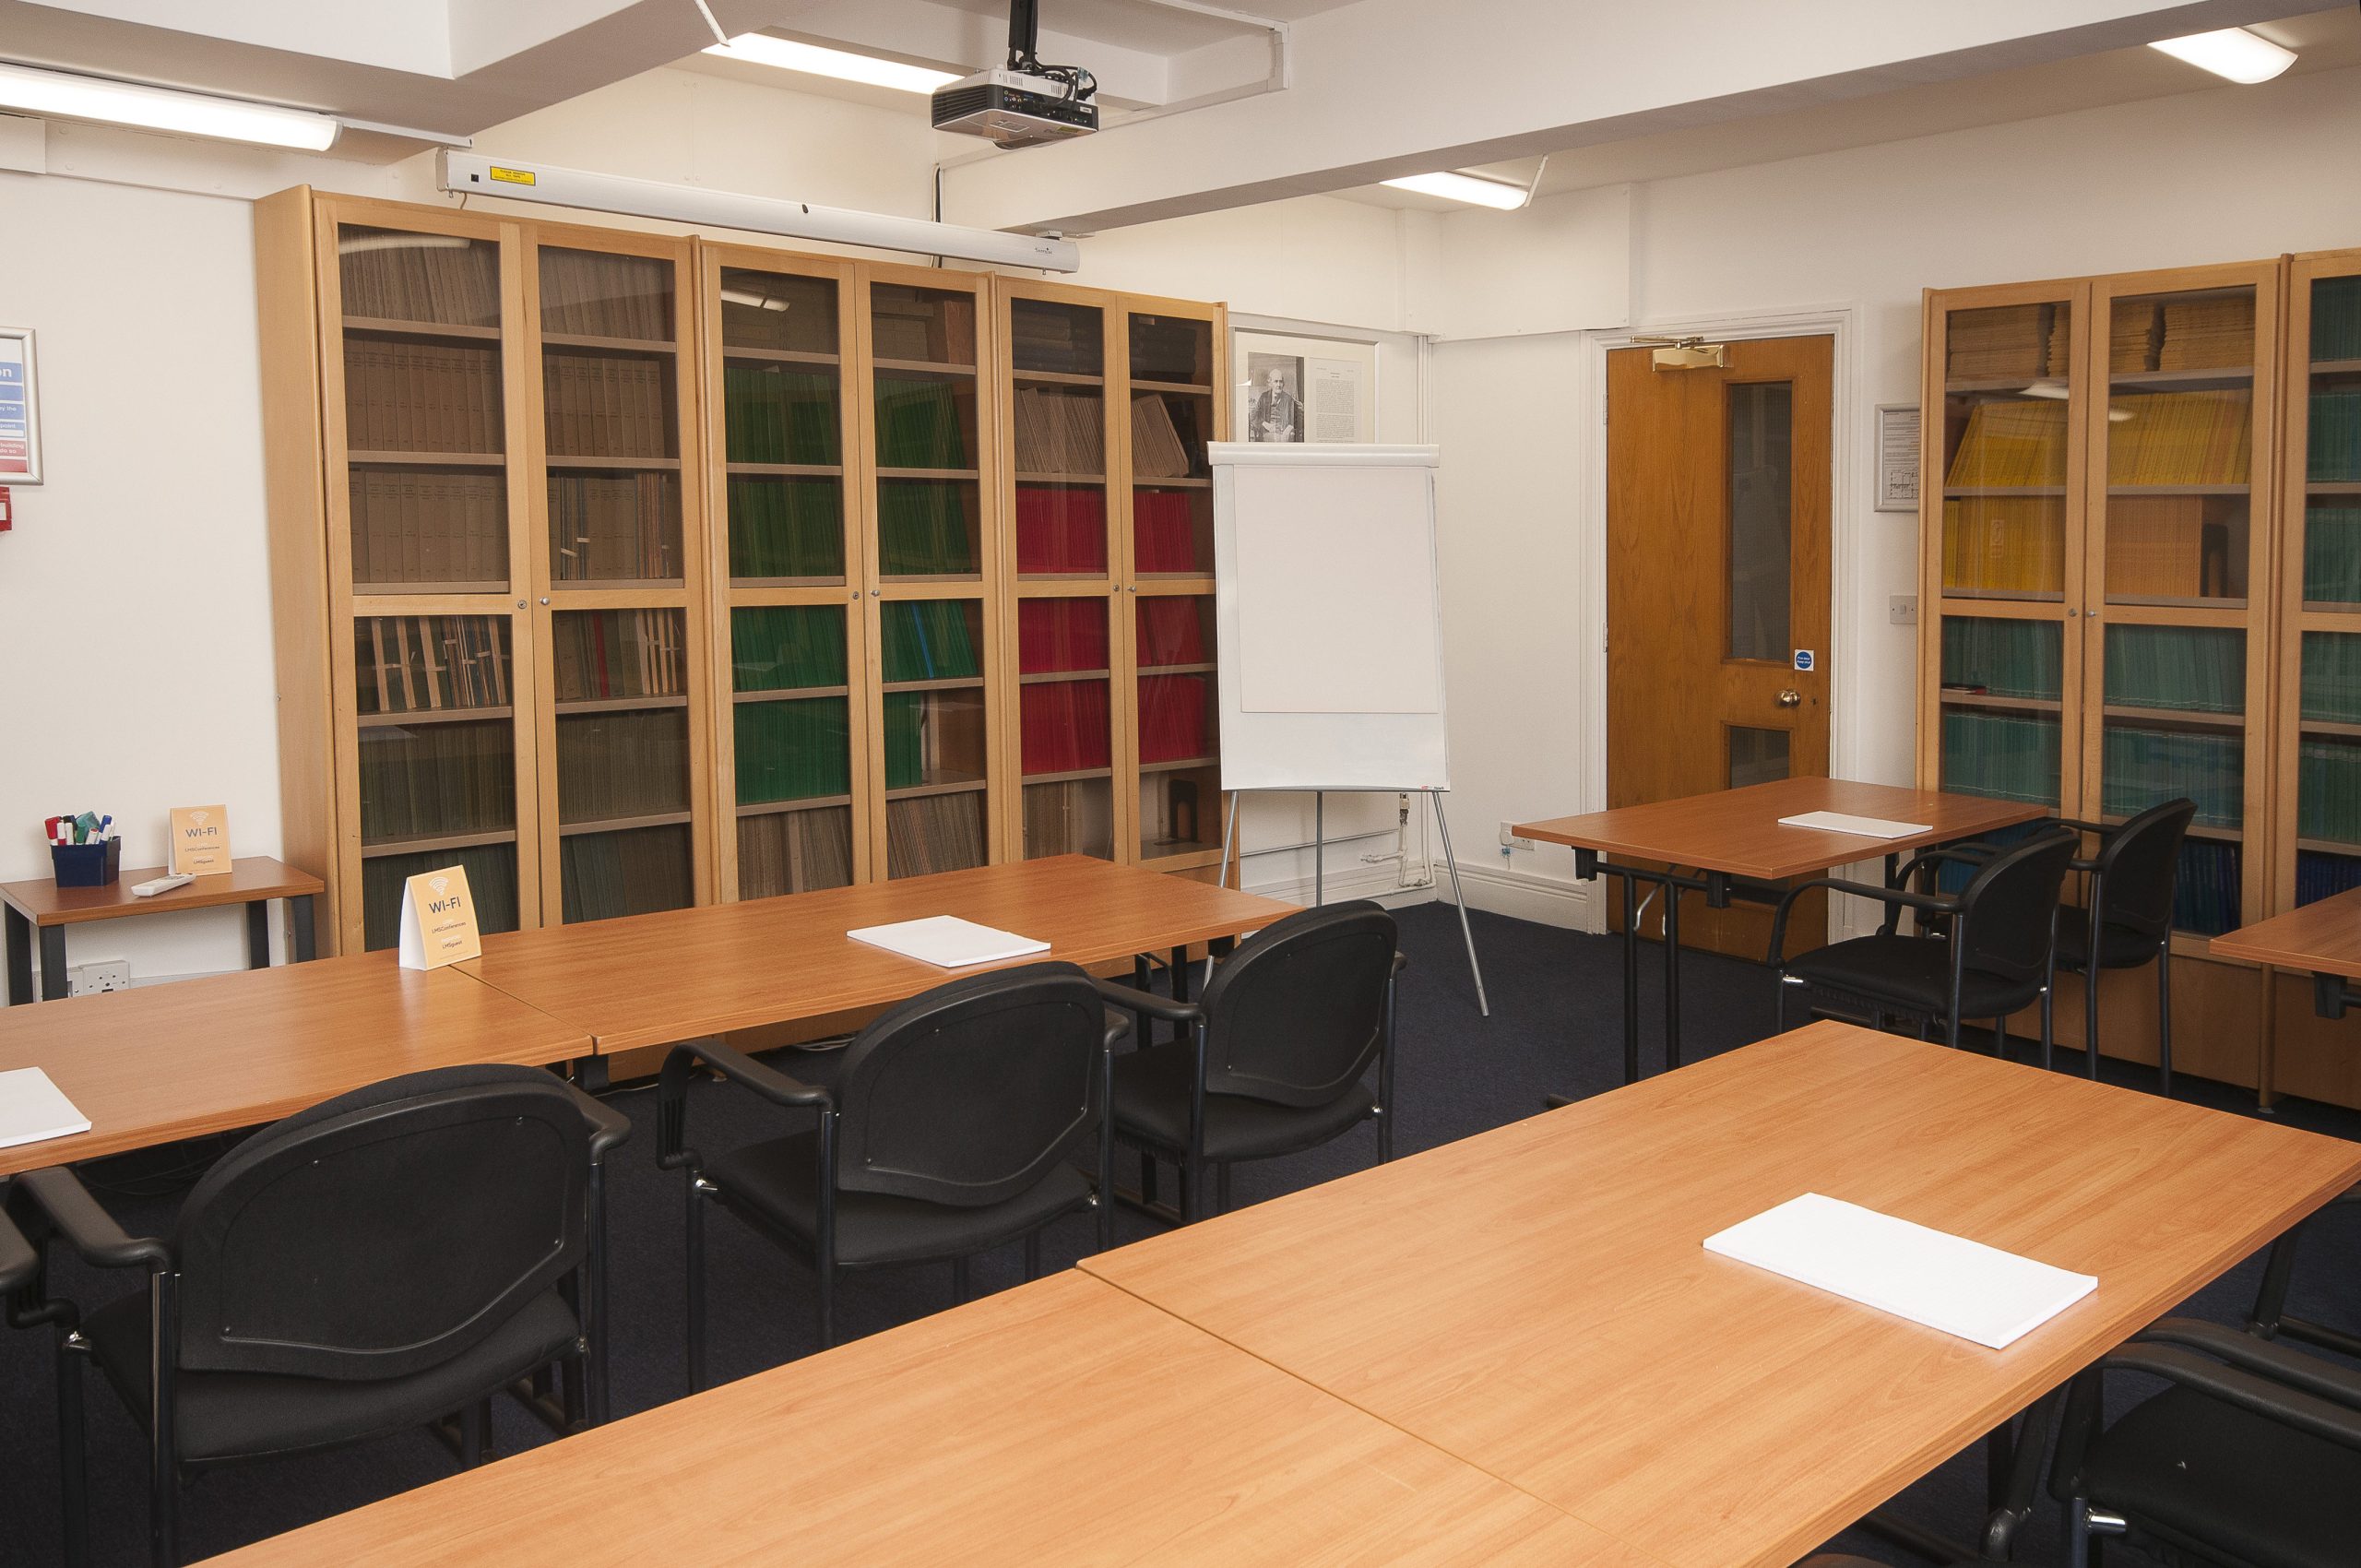 Photo of a medium sized meeting room in a classroom style